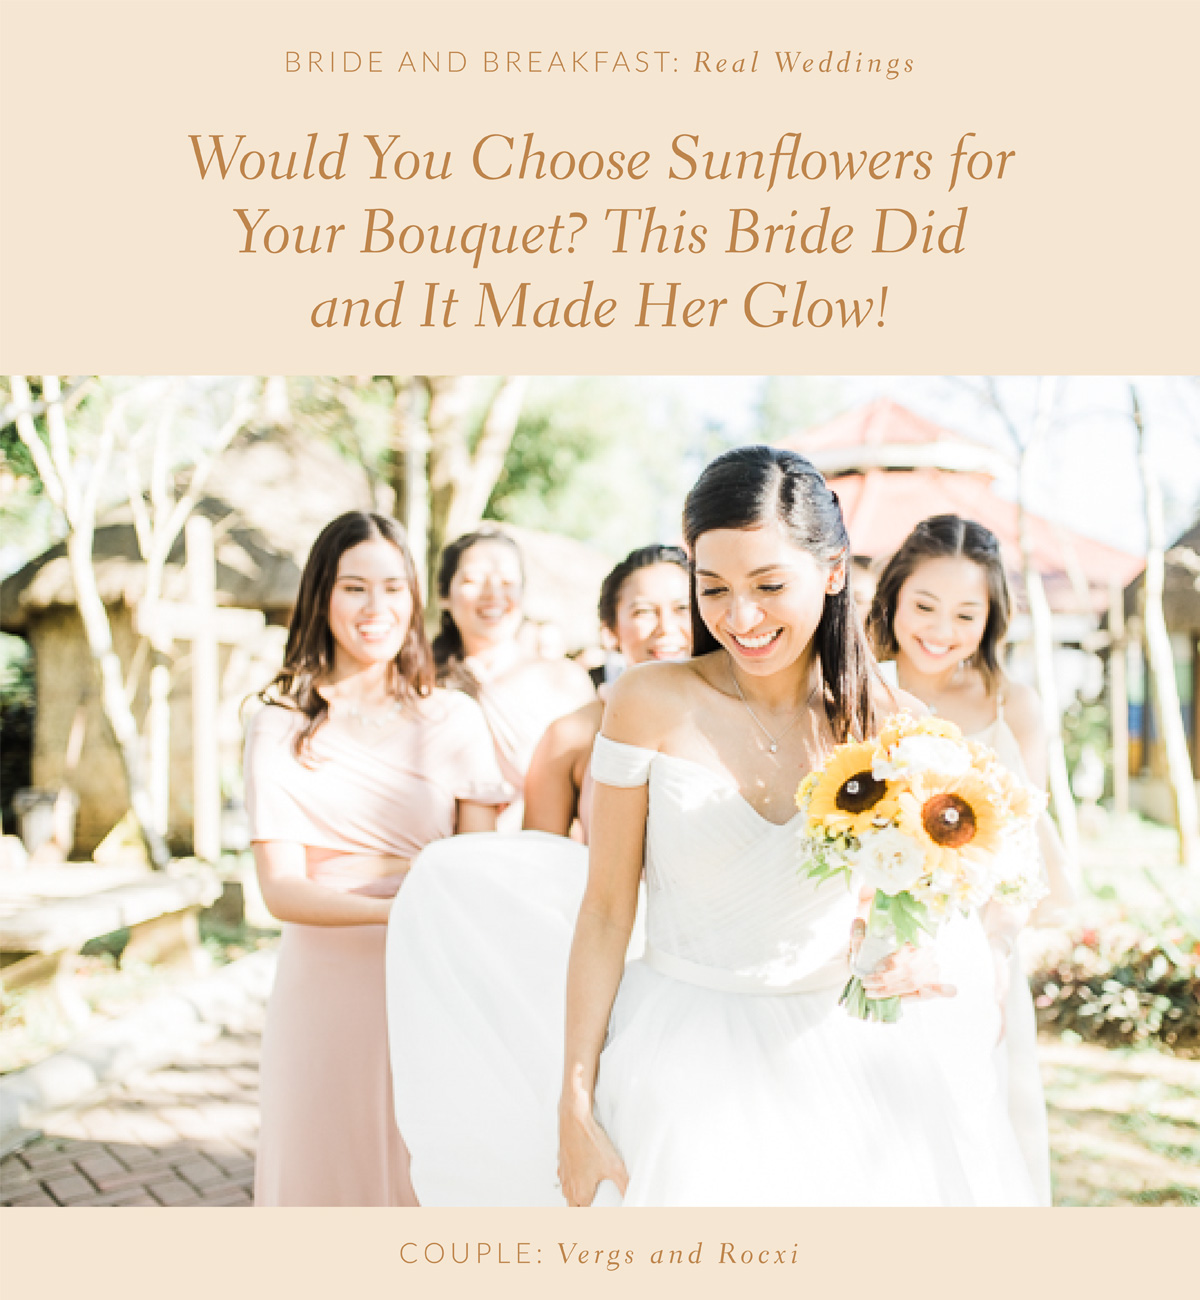 Would You Choose Sunflowers for Your Bouquet? This Bride Did and It Made Her Glow!